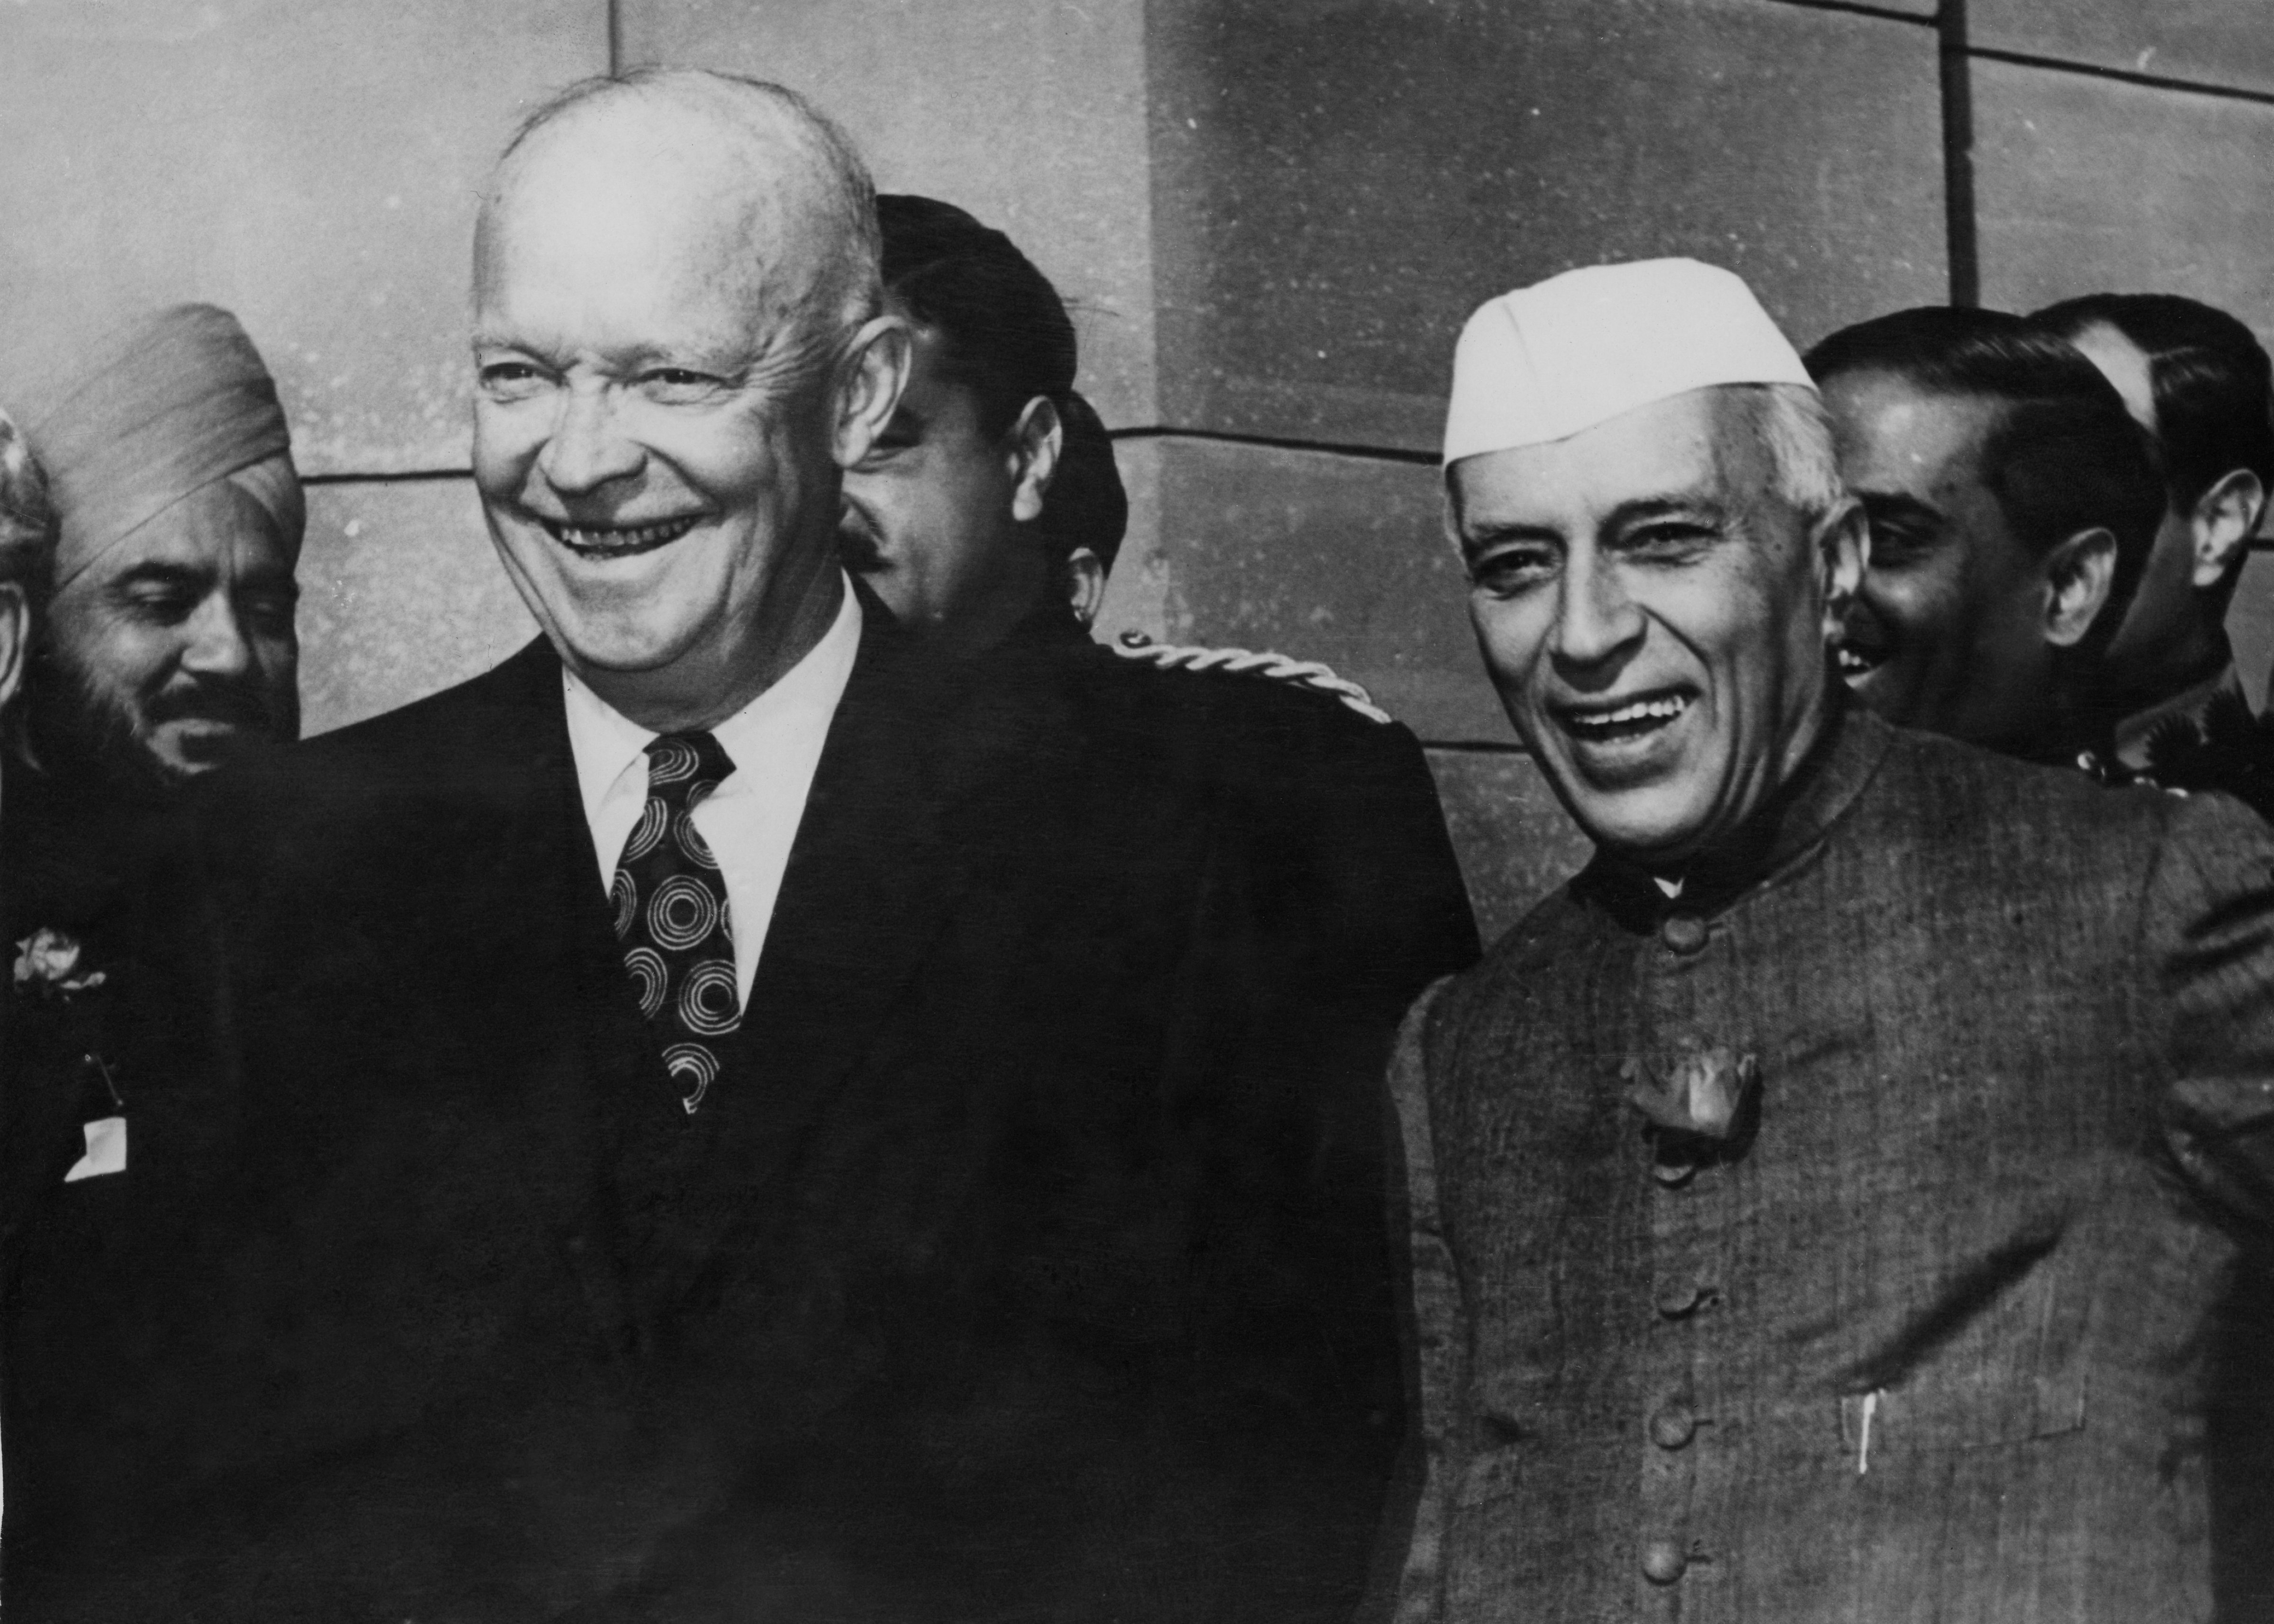 US President Dwight D. Eisenhower with Indian Prime Minister Jawaharlal Nehru at the Rashtrapati Bhavan in New Delhi, during Eisenhower's Goodwill Tour, Dec. 14, 1959. (Keystone/Hulton Archive/Getty Images)